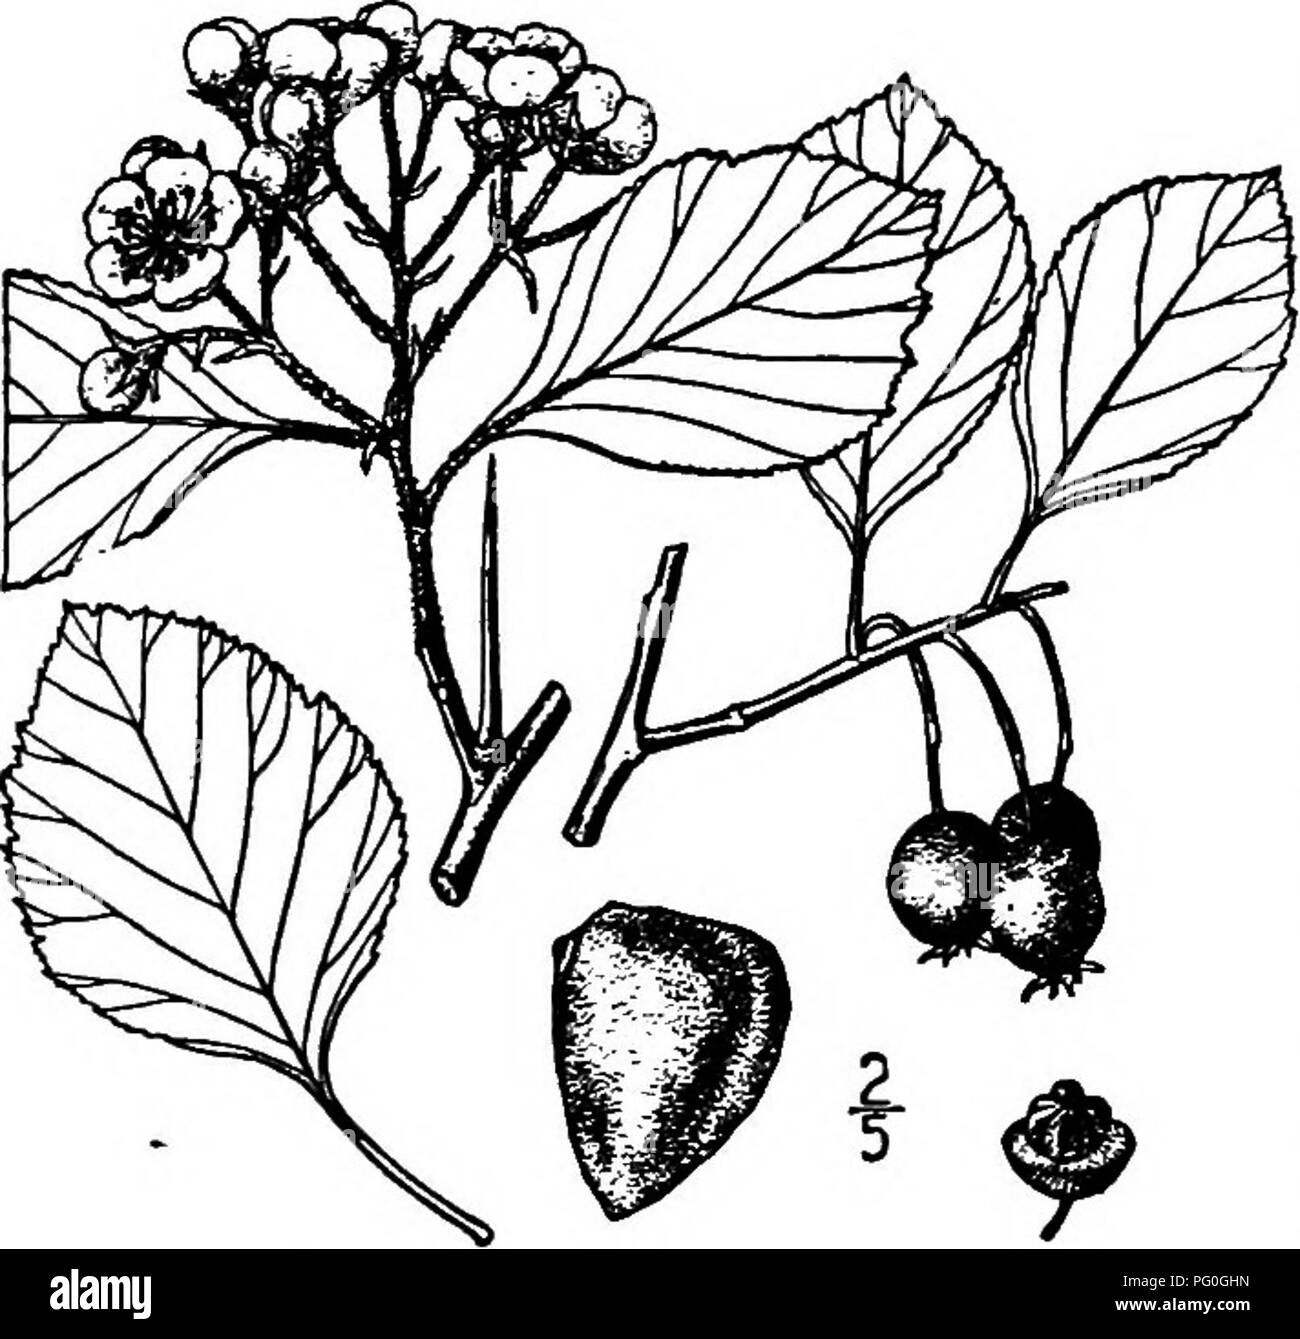 . North American trees : being descriptions and illustrations of the trees growing independently of cultivation in North America, north of Mexico and the West Indies . Trees. 462 The Thorn Trees 21. BUSH'S THORN — Oratsegns pyriformis Britton Bush's thorn occurs in rich bottom lands of southeastern Missouri. It is a tree 8 to 9 meters high, with spreading branches forming a broad crown; the twigs are Hght green and long-hairy when young, becoming gray and smooth, and have an occasional sUm, chestnut-brown spine 2 to 4 cm. long. The leaves are broadly oval or obo- vate-oval, 3 to 7 cm. long, 2  Stock Photo